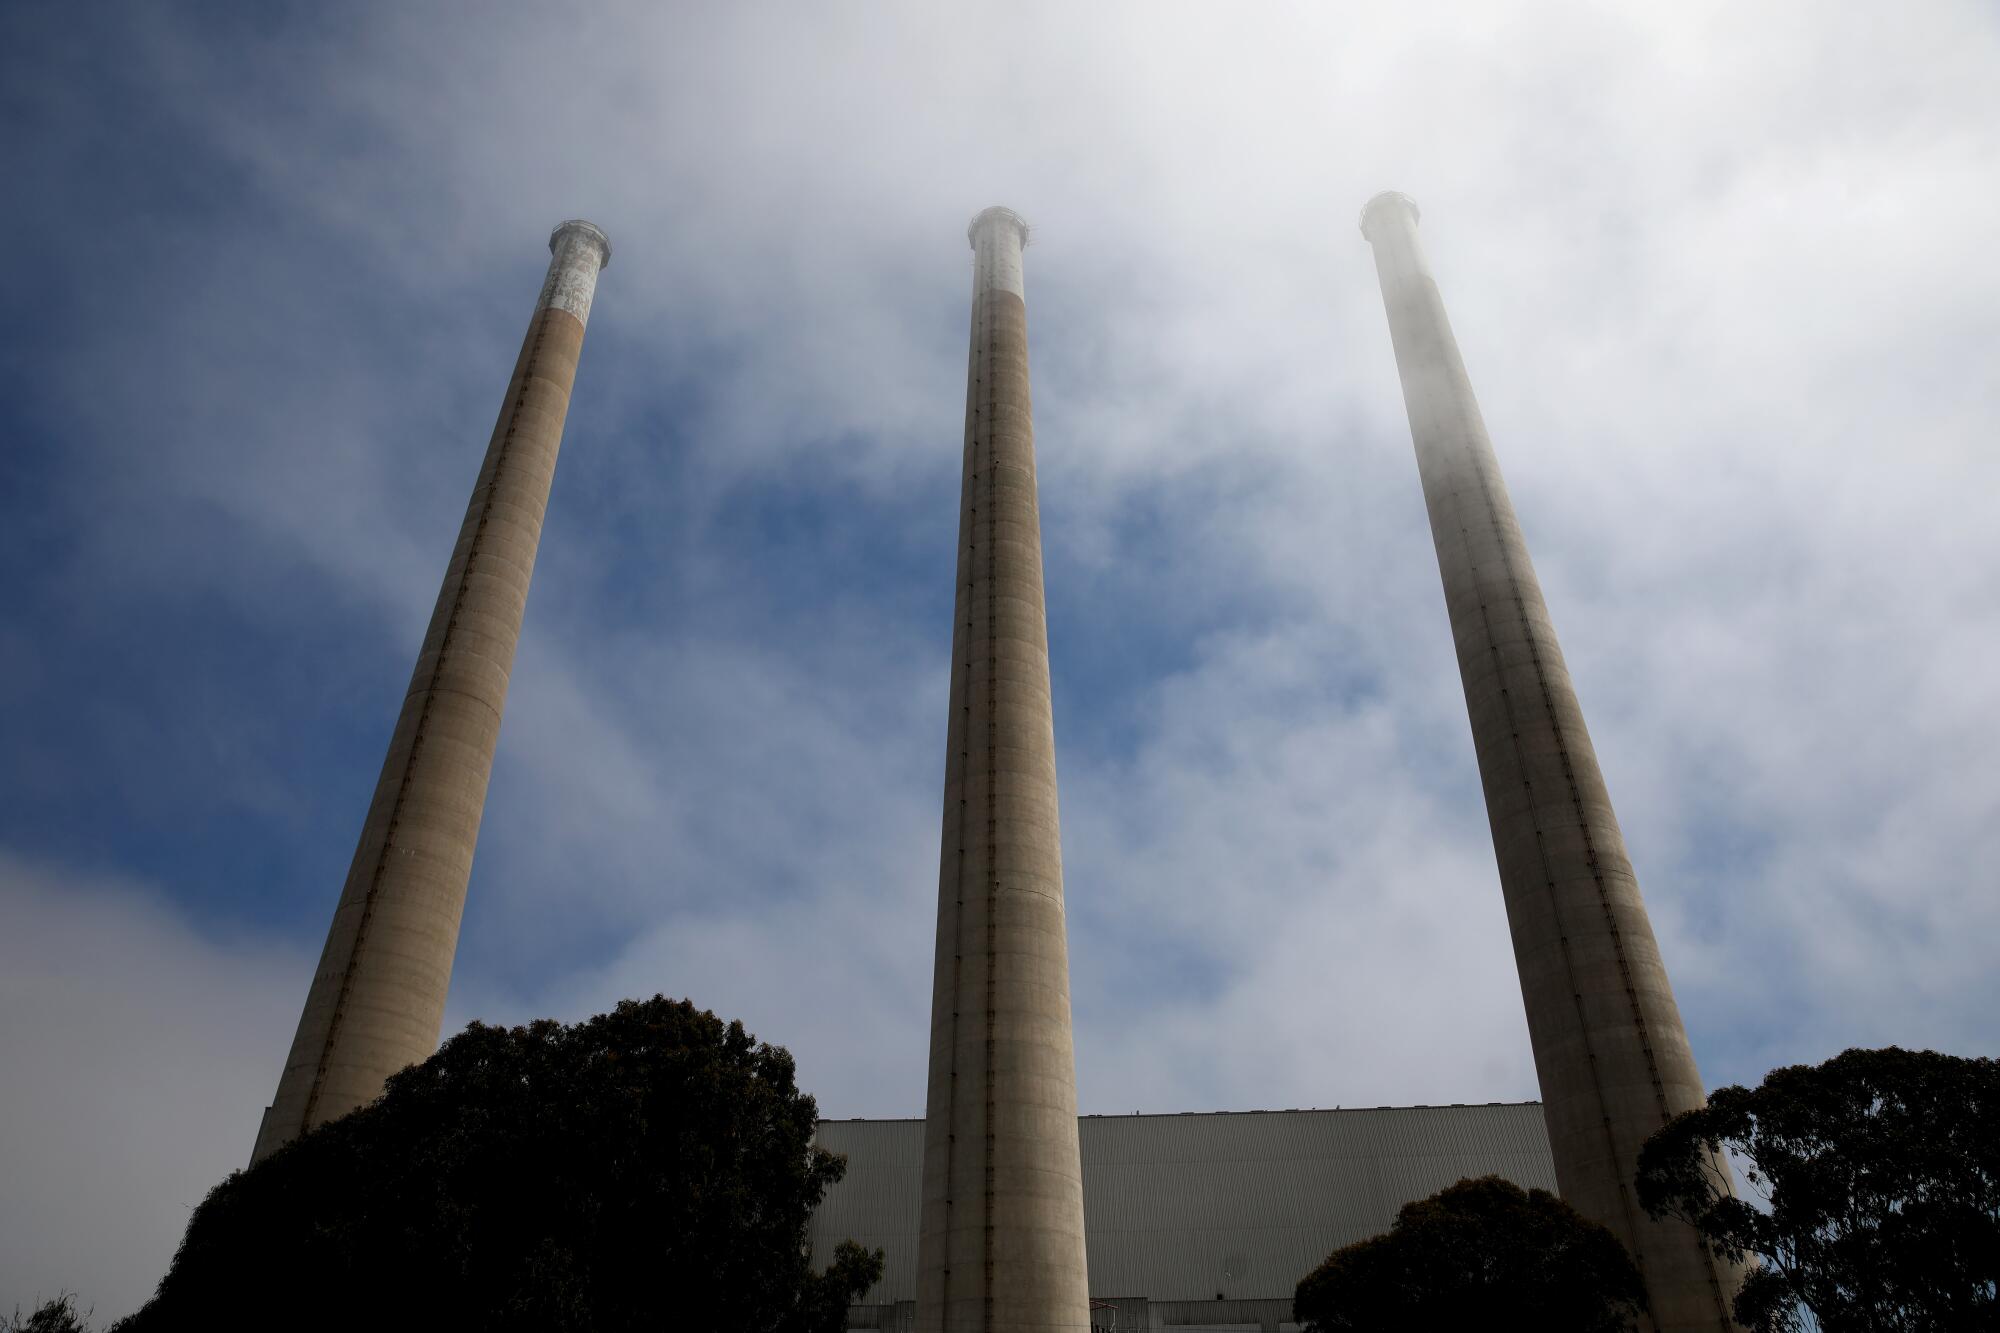 Three smokestacks rise from a building